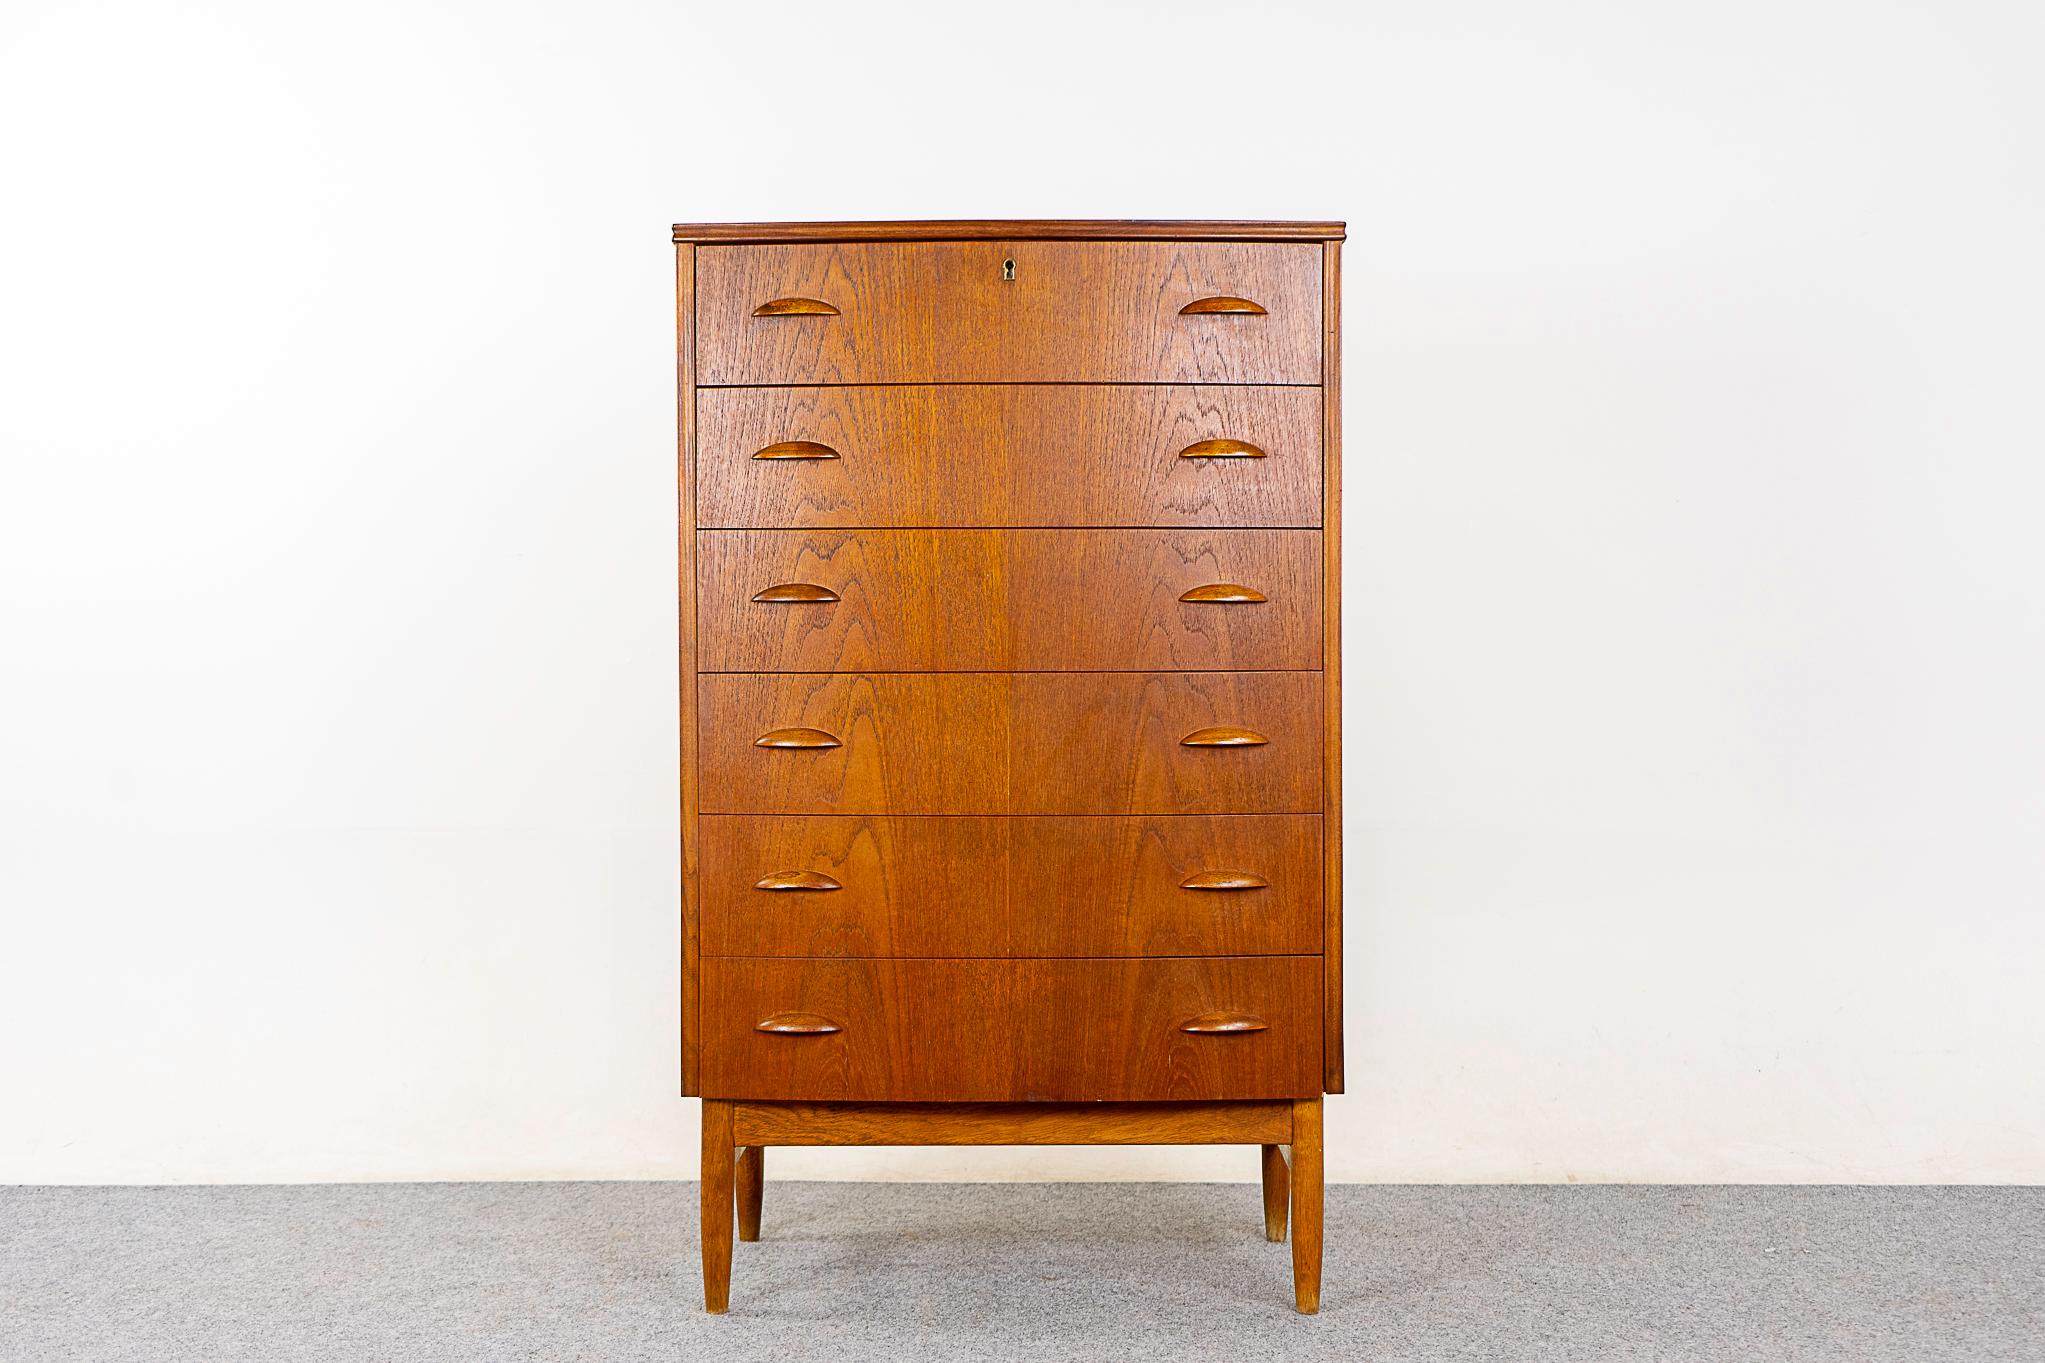 Teak Danish highboy dresser, circa 1960's. Gentle curvaceous bow front with stunning book-matched drawer faces. Contrasting oak base with elegant crossbars. 

Please inquire for remote and international shipping.